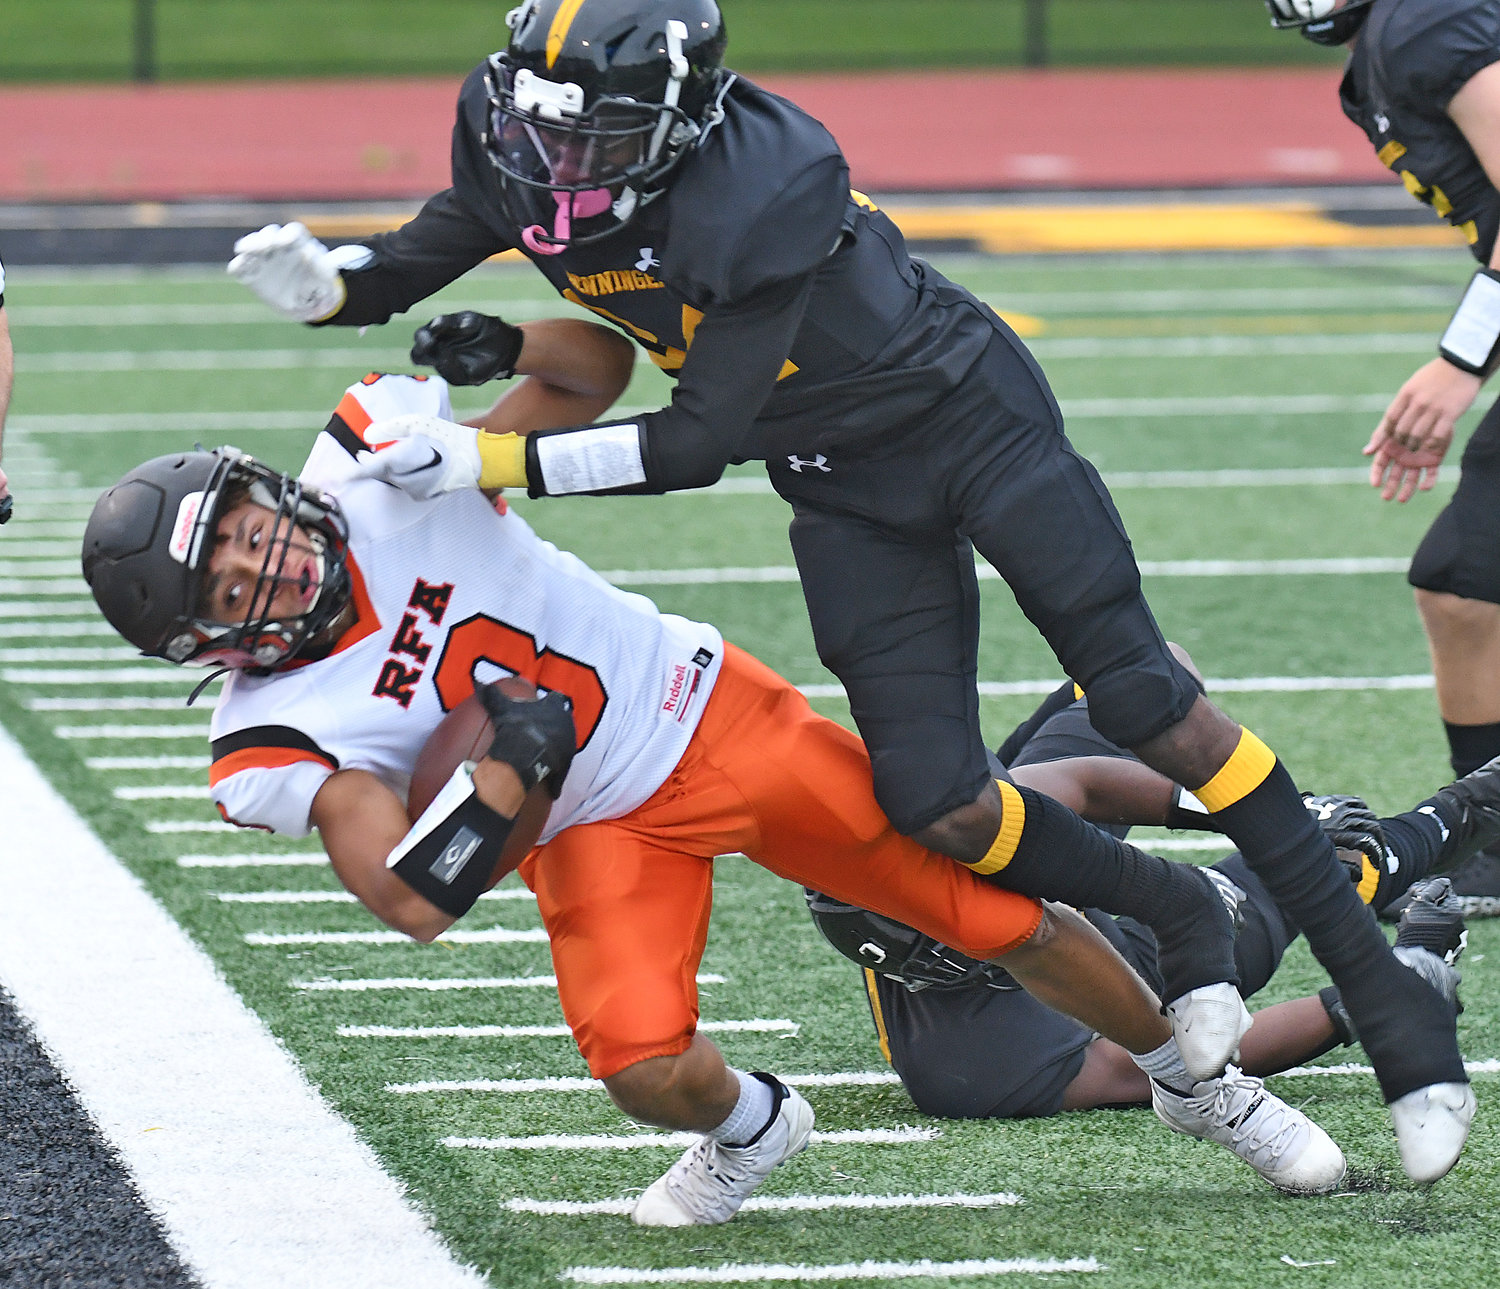 Rome Free Academy receiver Lebron Bowman gets toppled out of bounds by Henninger's Luis Madero-Williams in the first quarter of Friday's game. RFA got a 21-20 road win. Bowman's 55-yard catch and run for a touchdown was the game-winning TD.